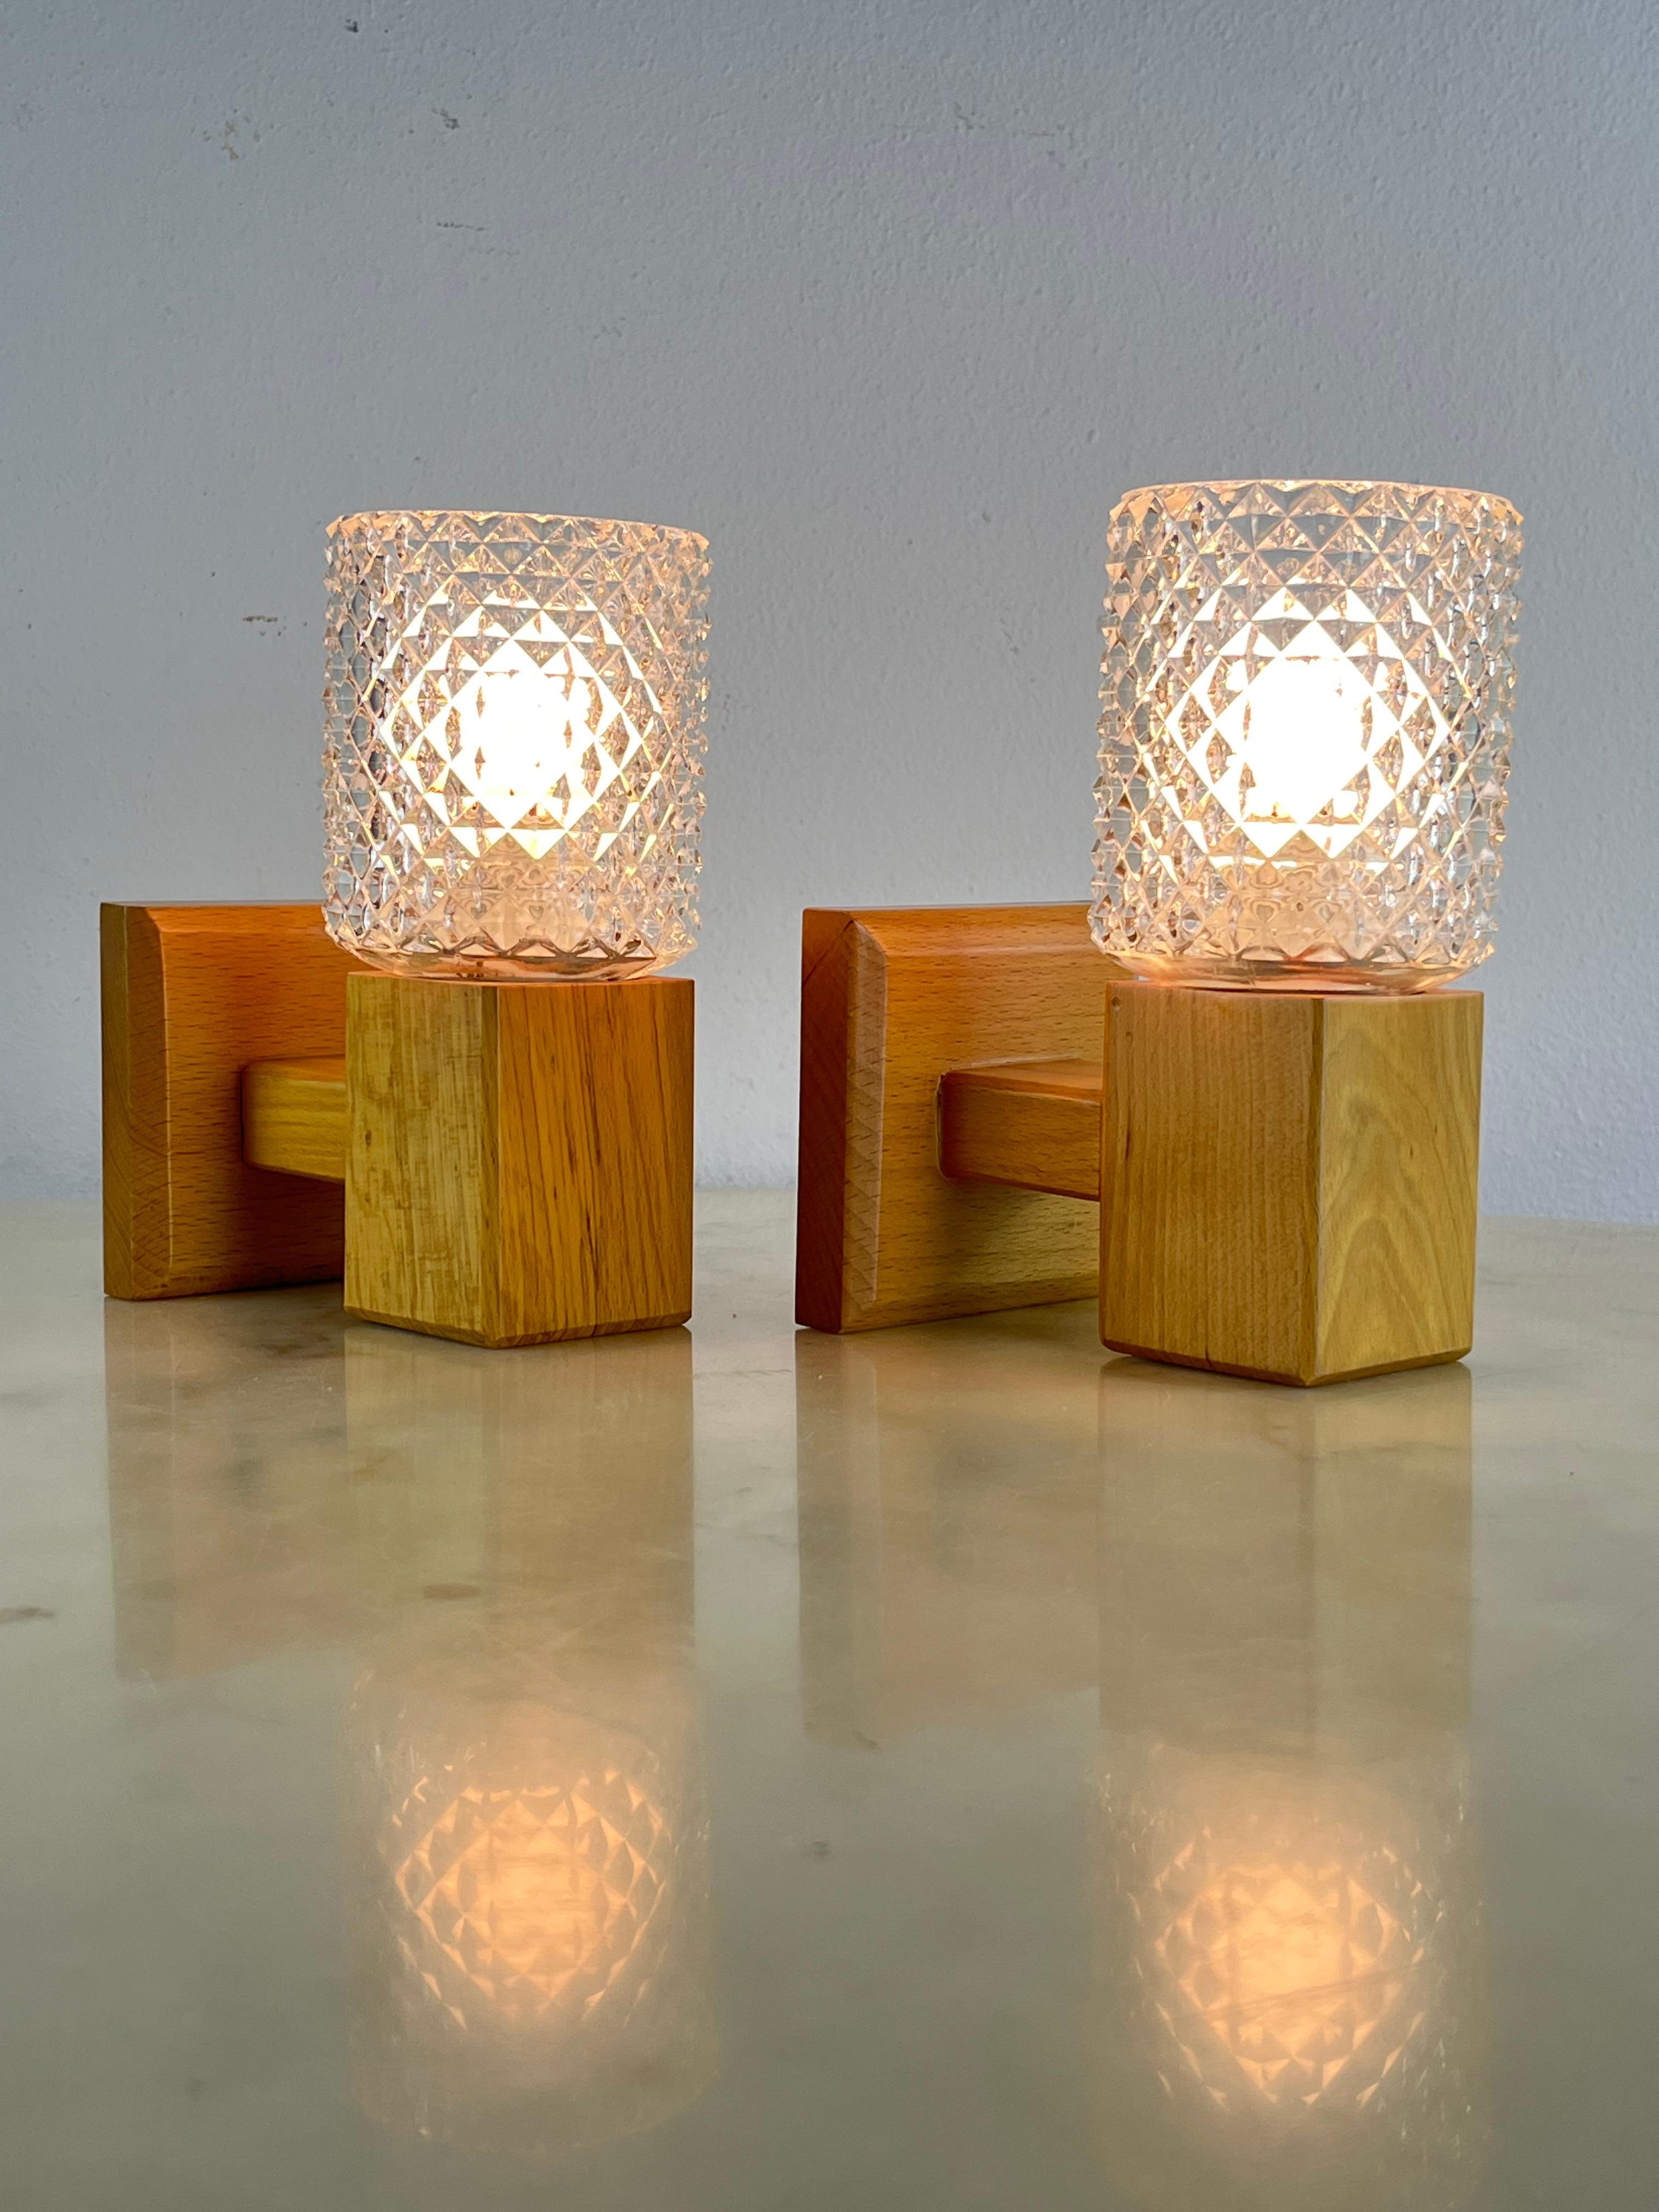 Set of 2 pine wood and glass sconce wall lamps Mid-Century Denmark 1960s
Intact and working, E27 lamps.
 
We guarantee careful packaging and ship with our partner DHL, insuring the value of the shipment which will be fully refunded in the event of